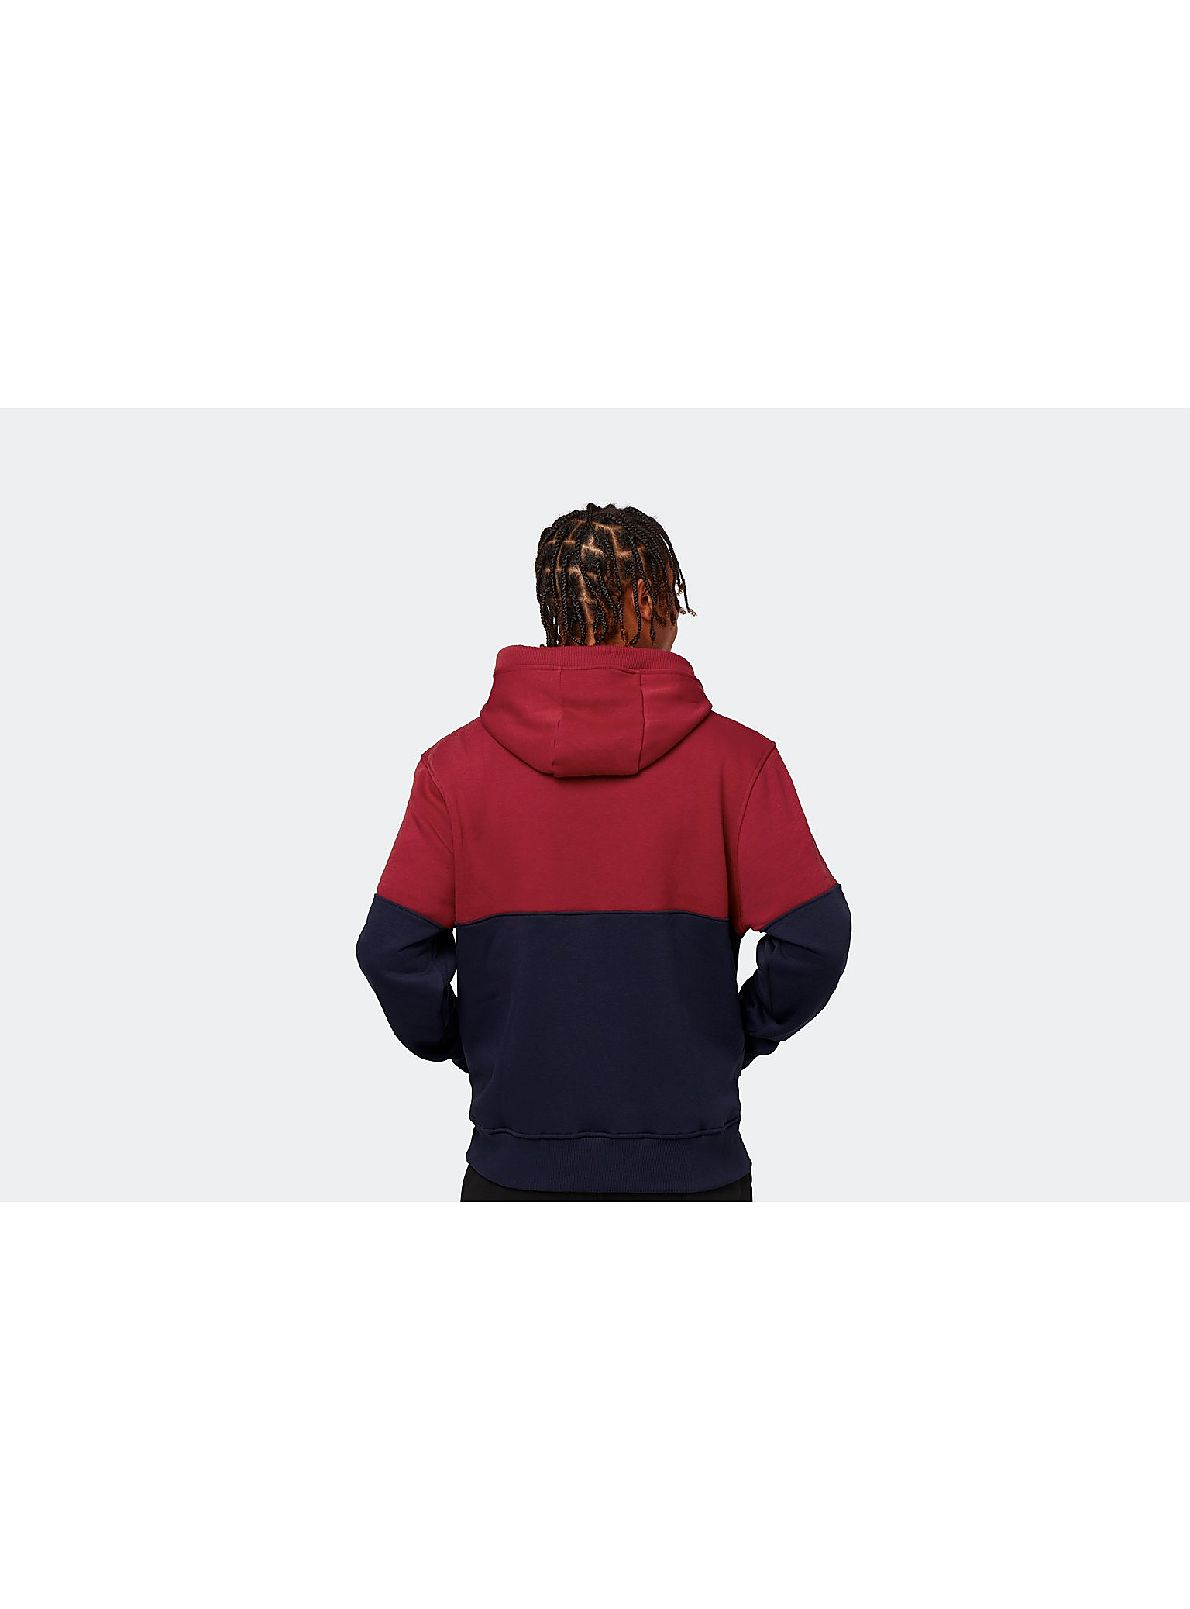 Arsenal Since 1886 Contrast Panel Hoodie | Official Online Store